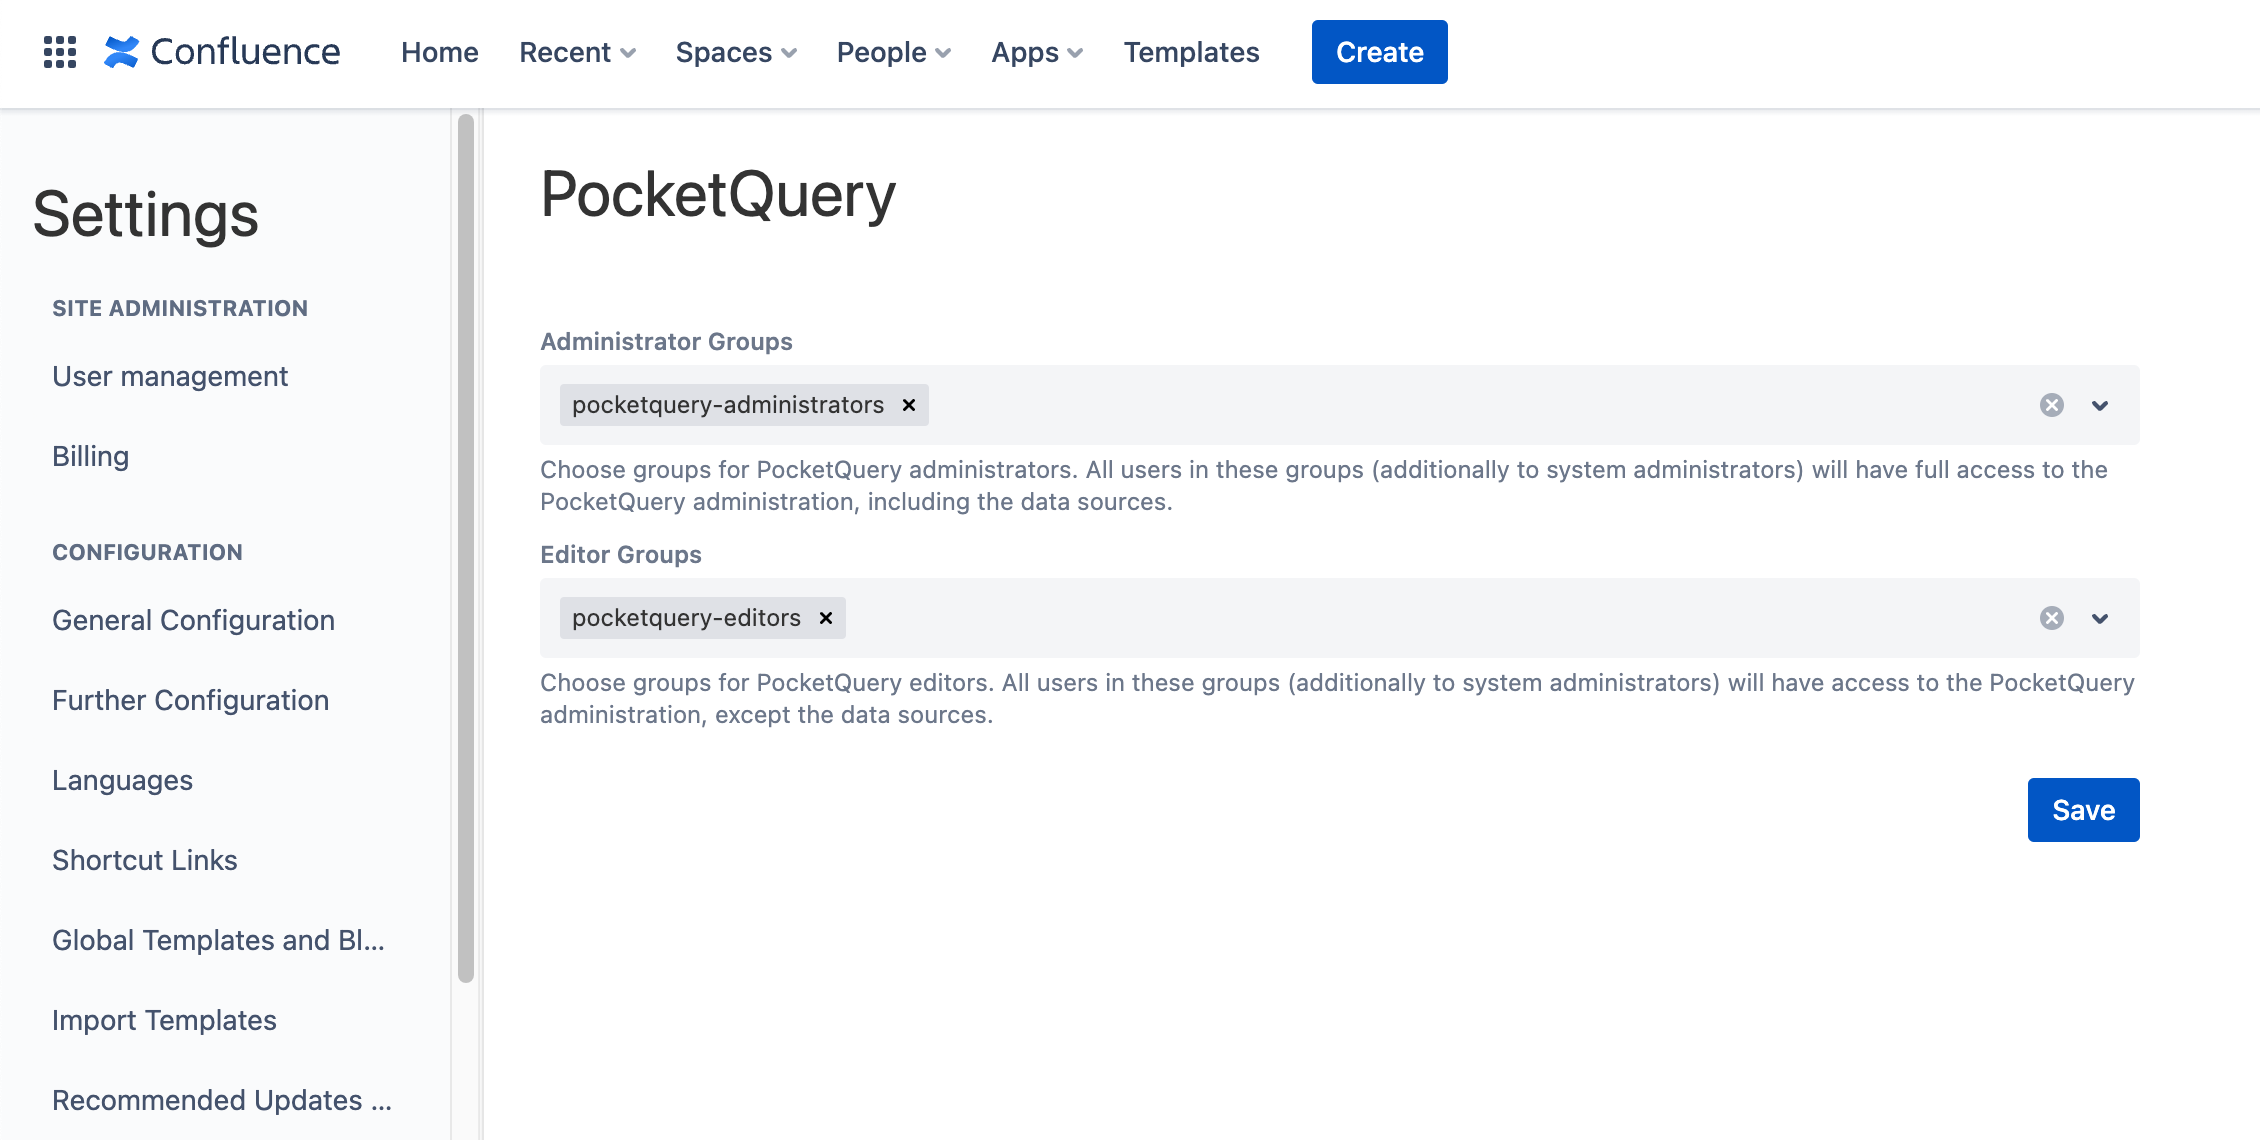 The PocketQuery Extended Roles